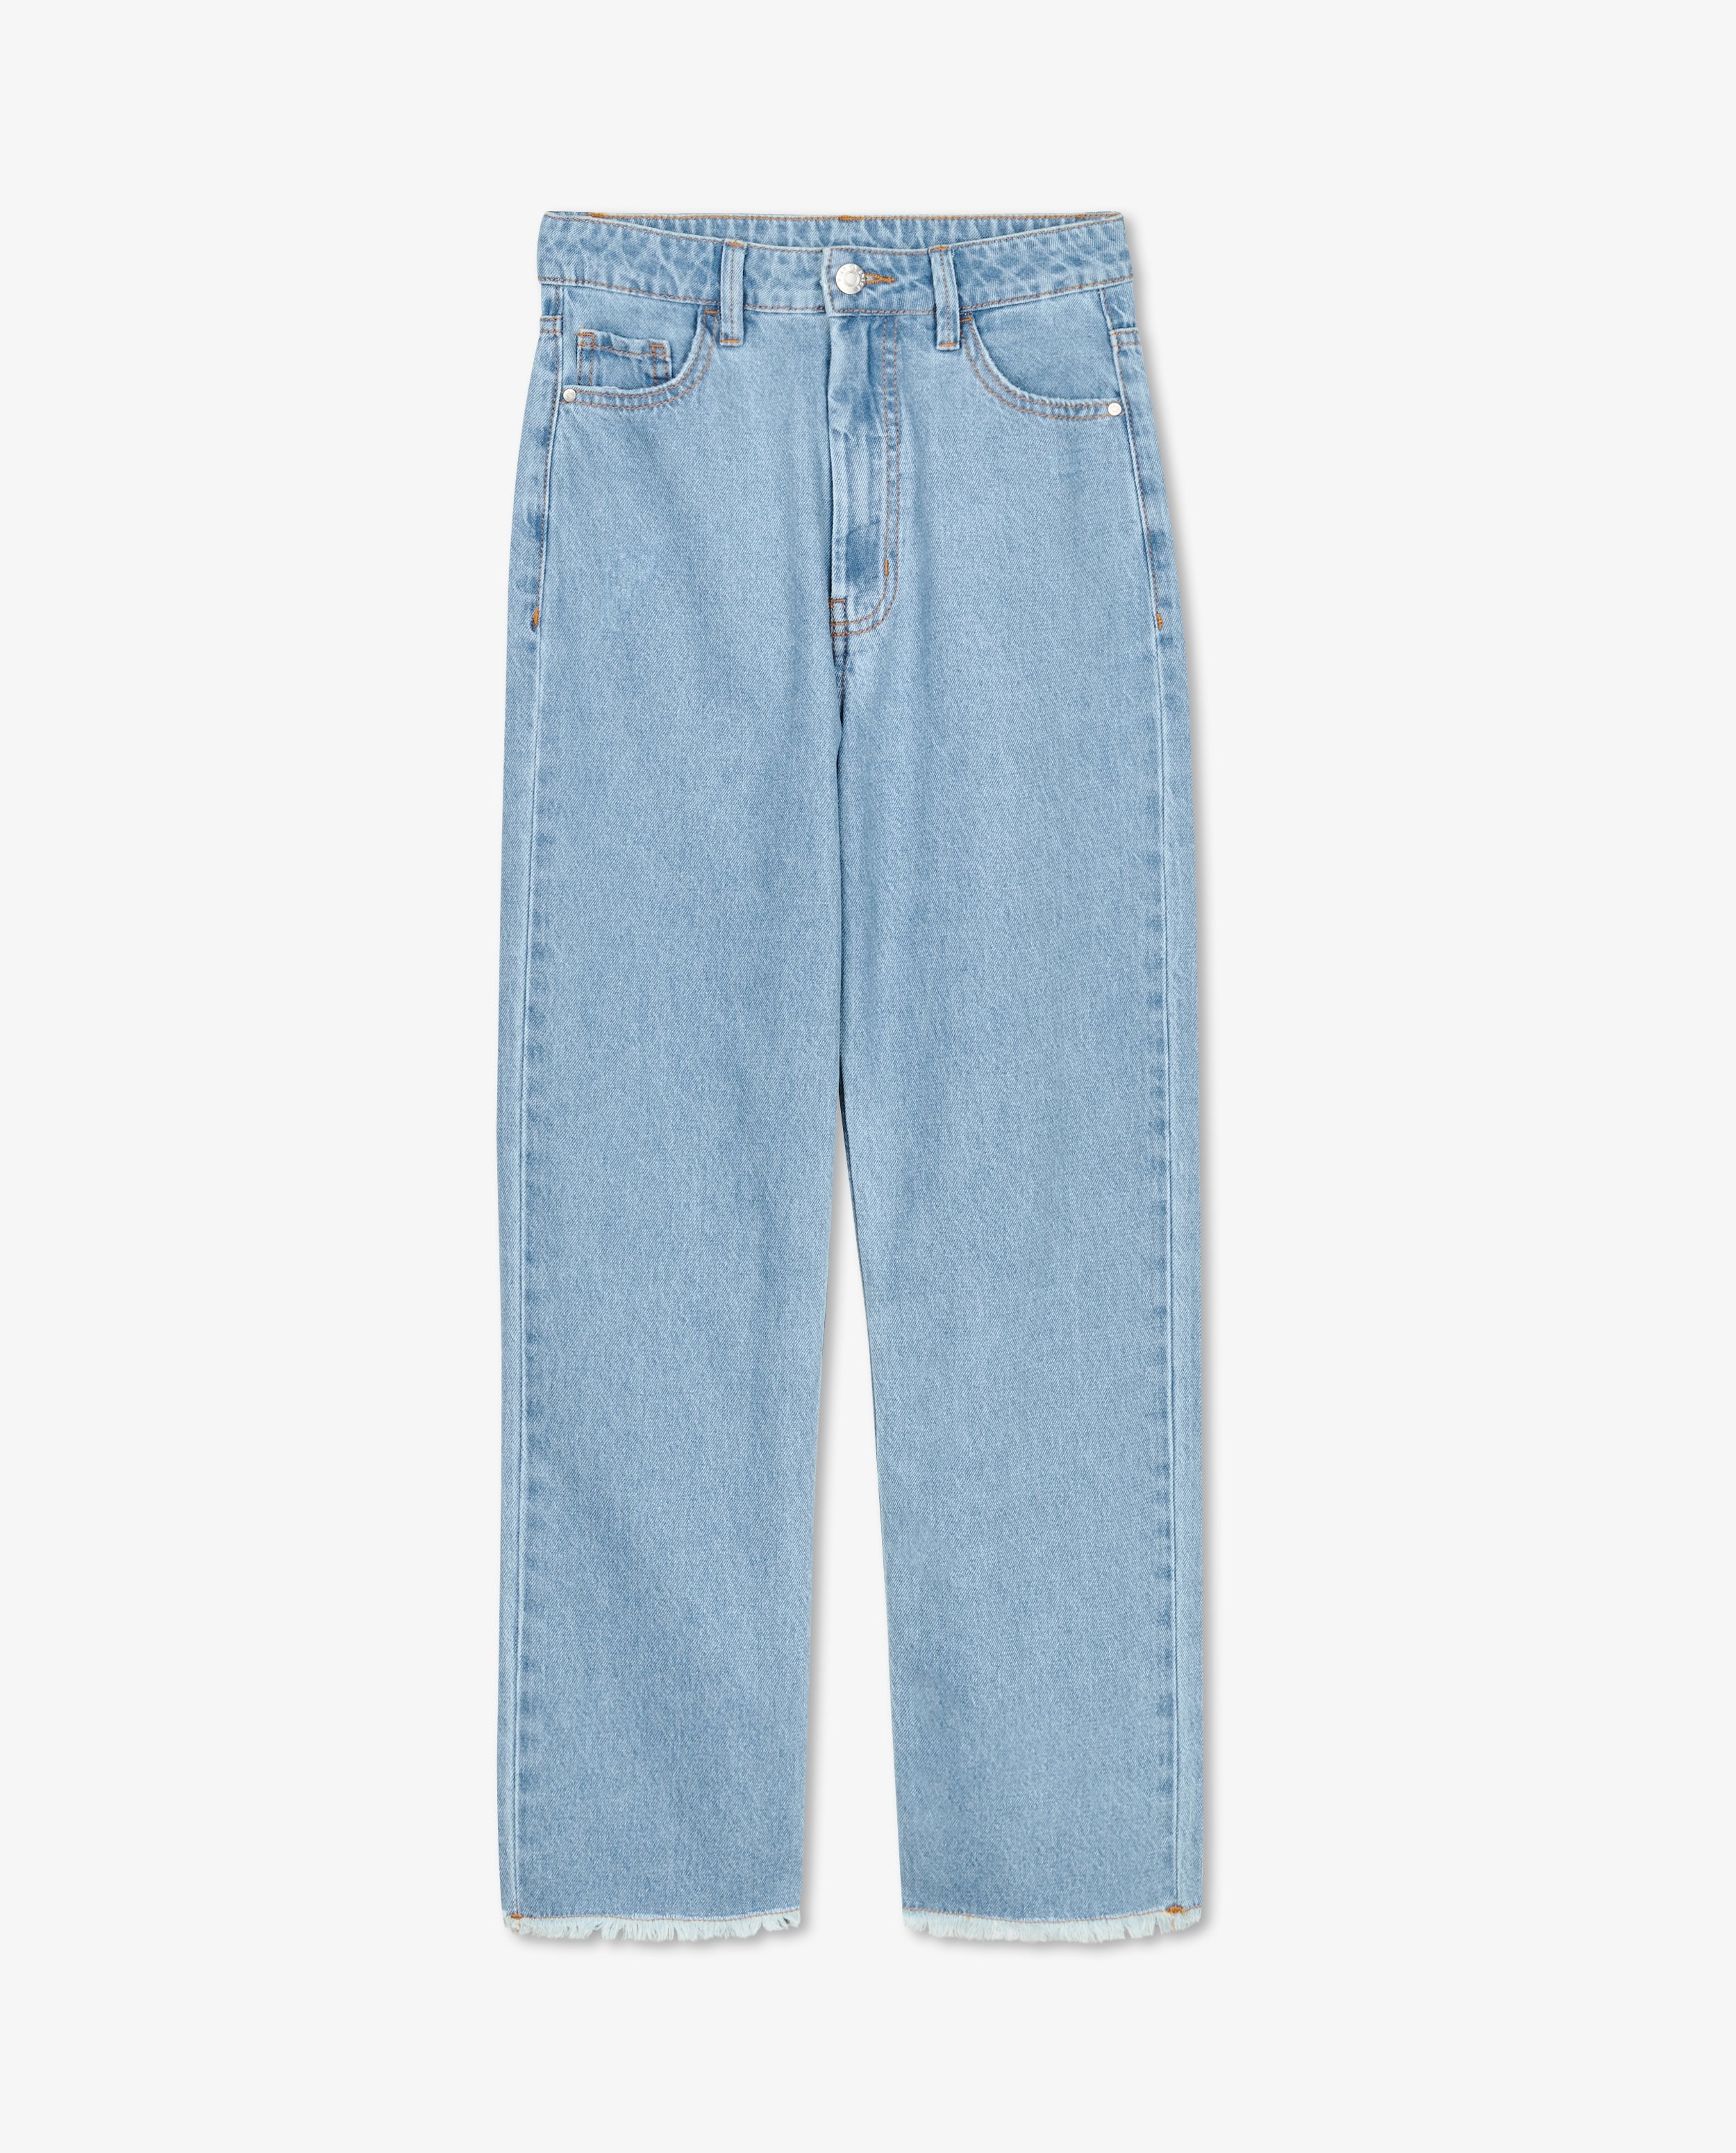 Jeans - Blauwe jeans, straight fit